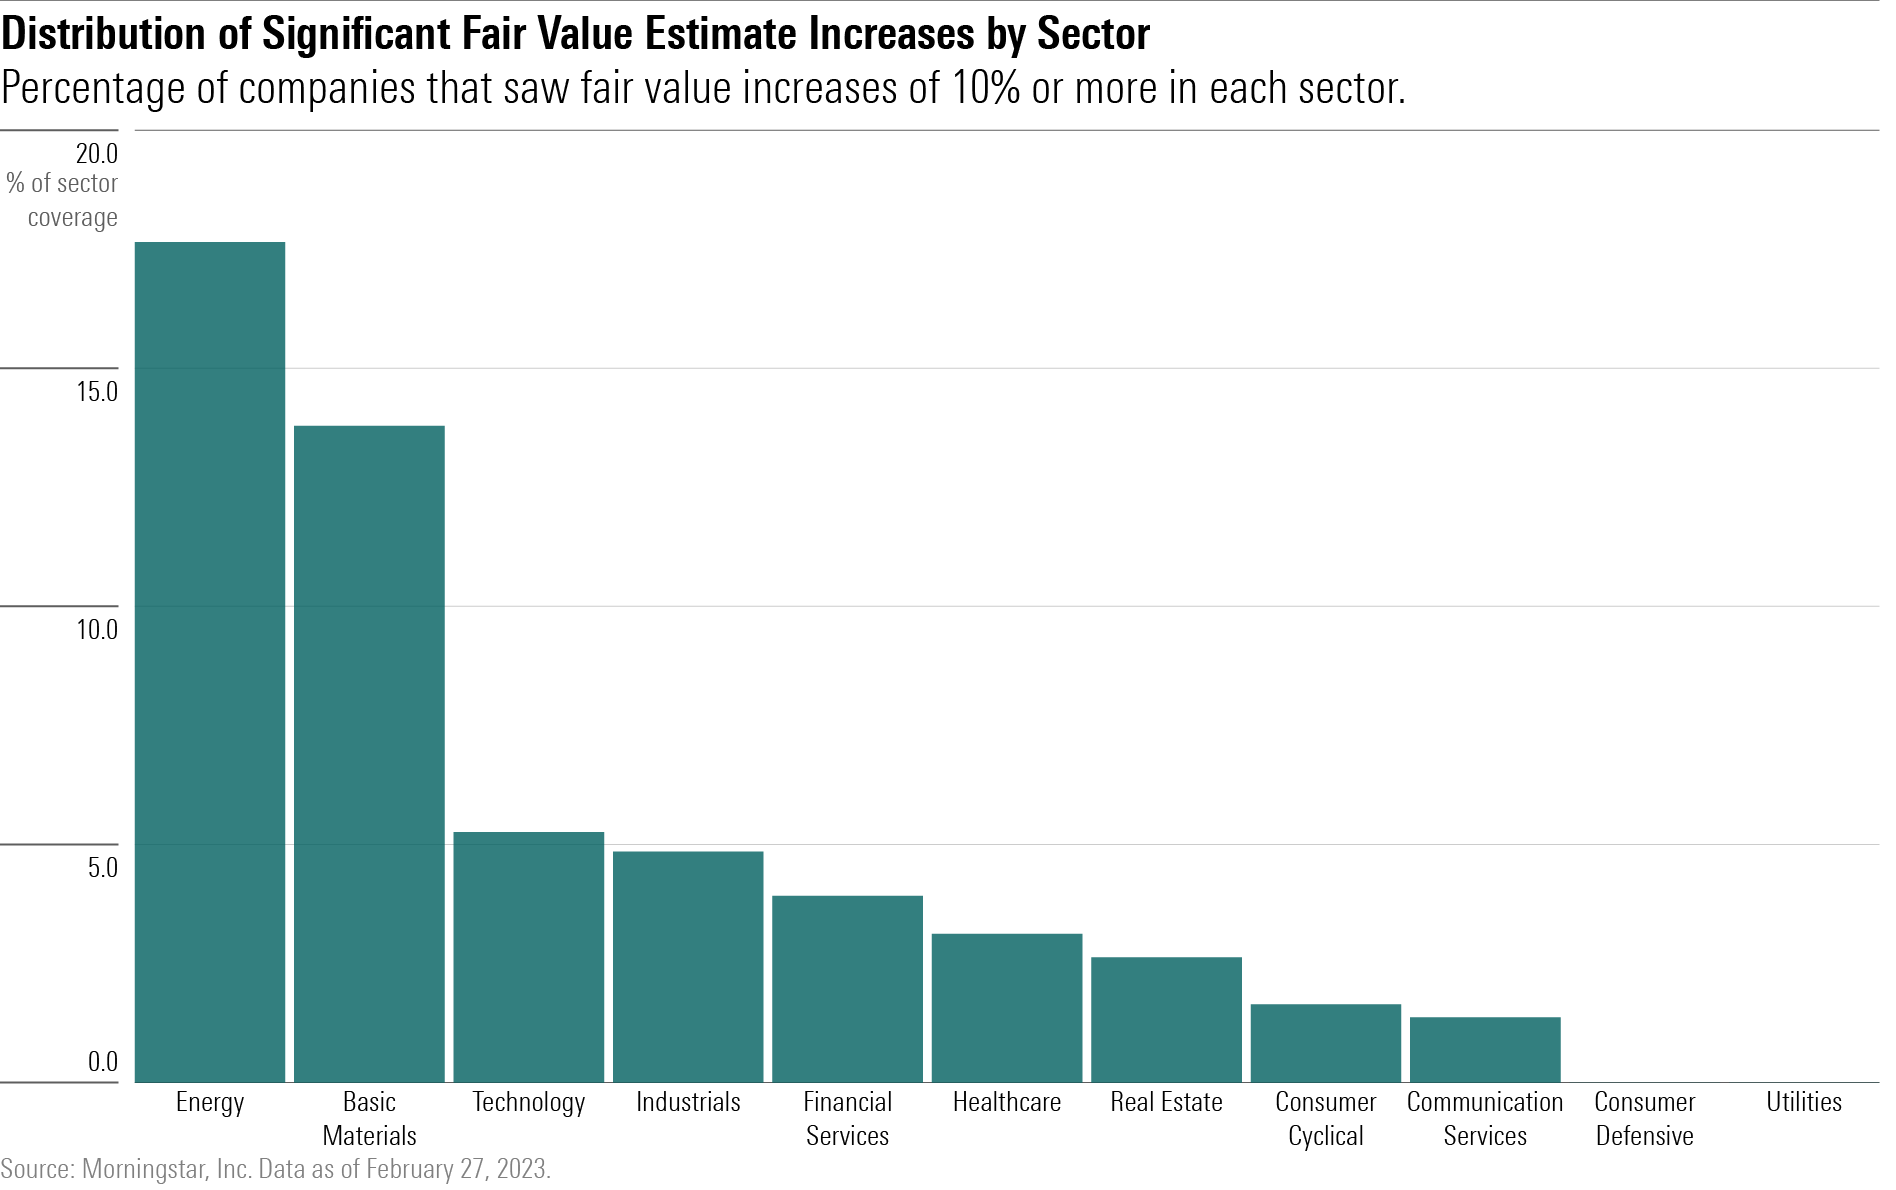 A bar chart showing the % of U.S.-listed stocks covered by Morningstar analysts that had fair value estimate increases of 10% or more by sector.